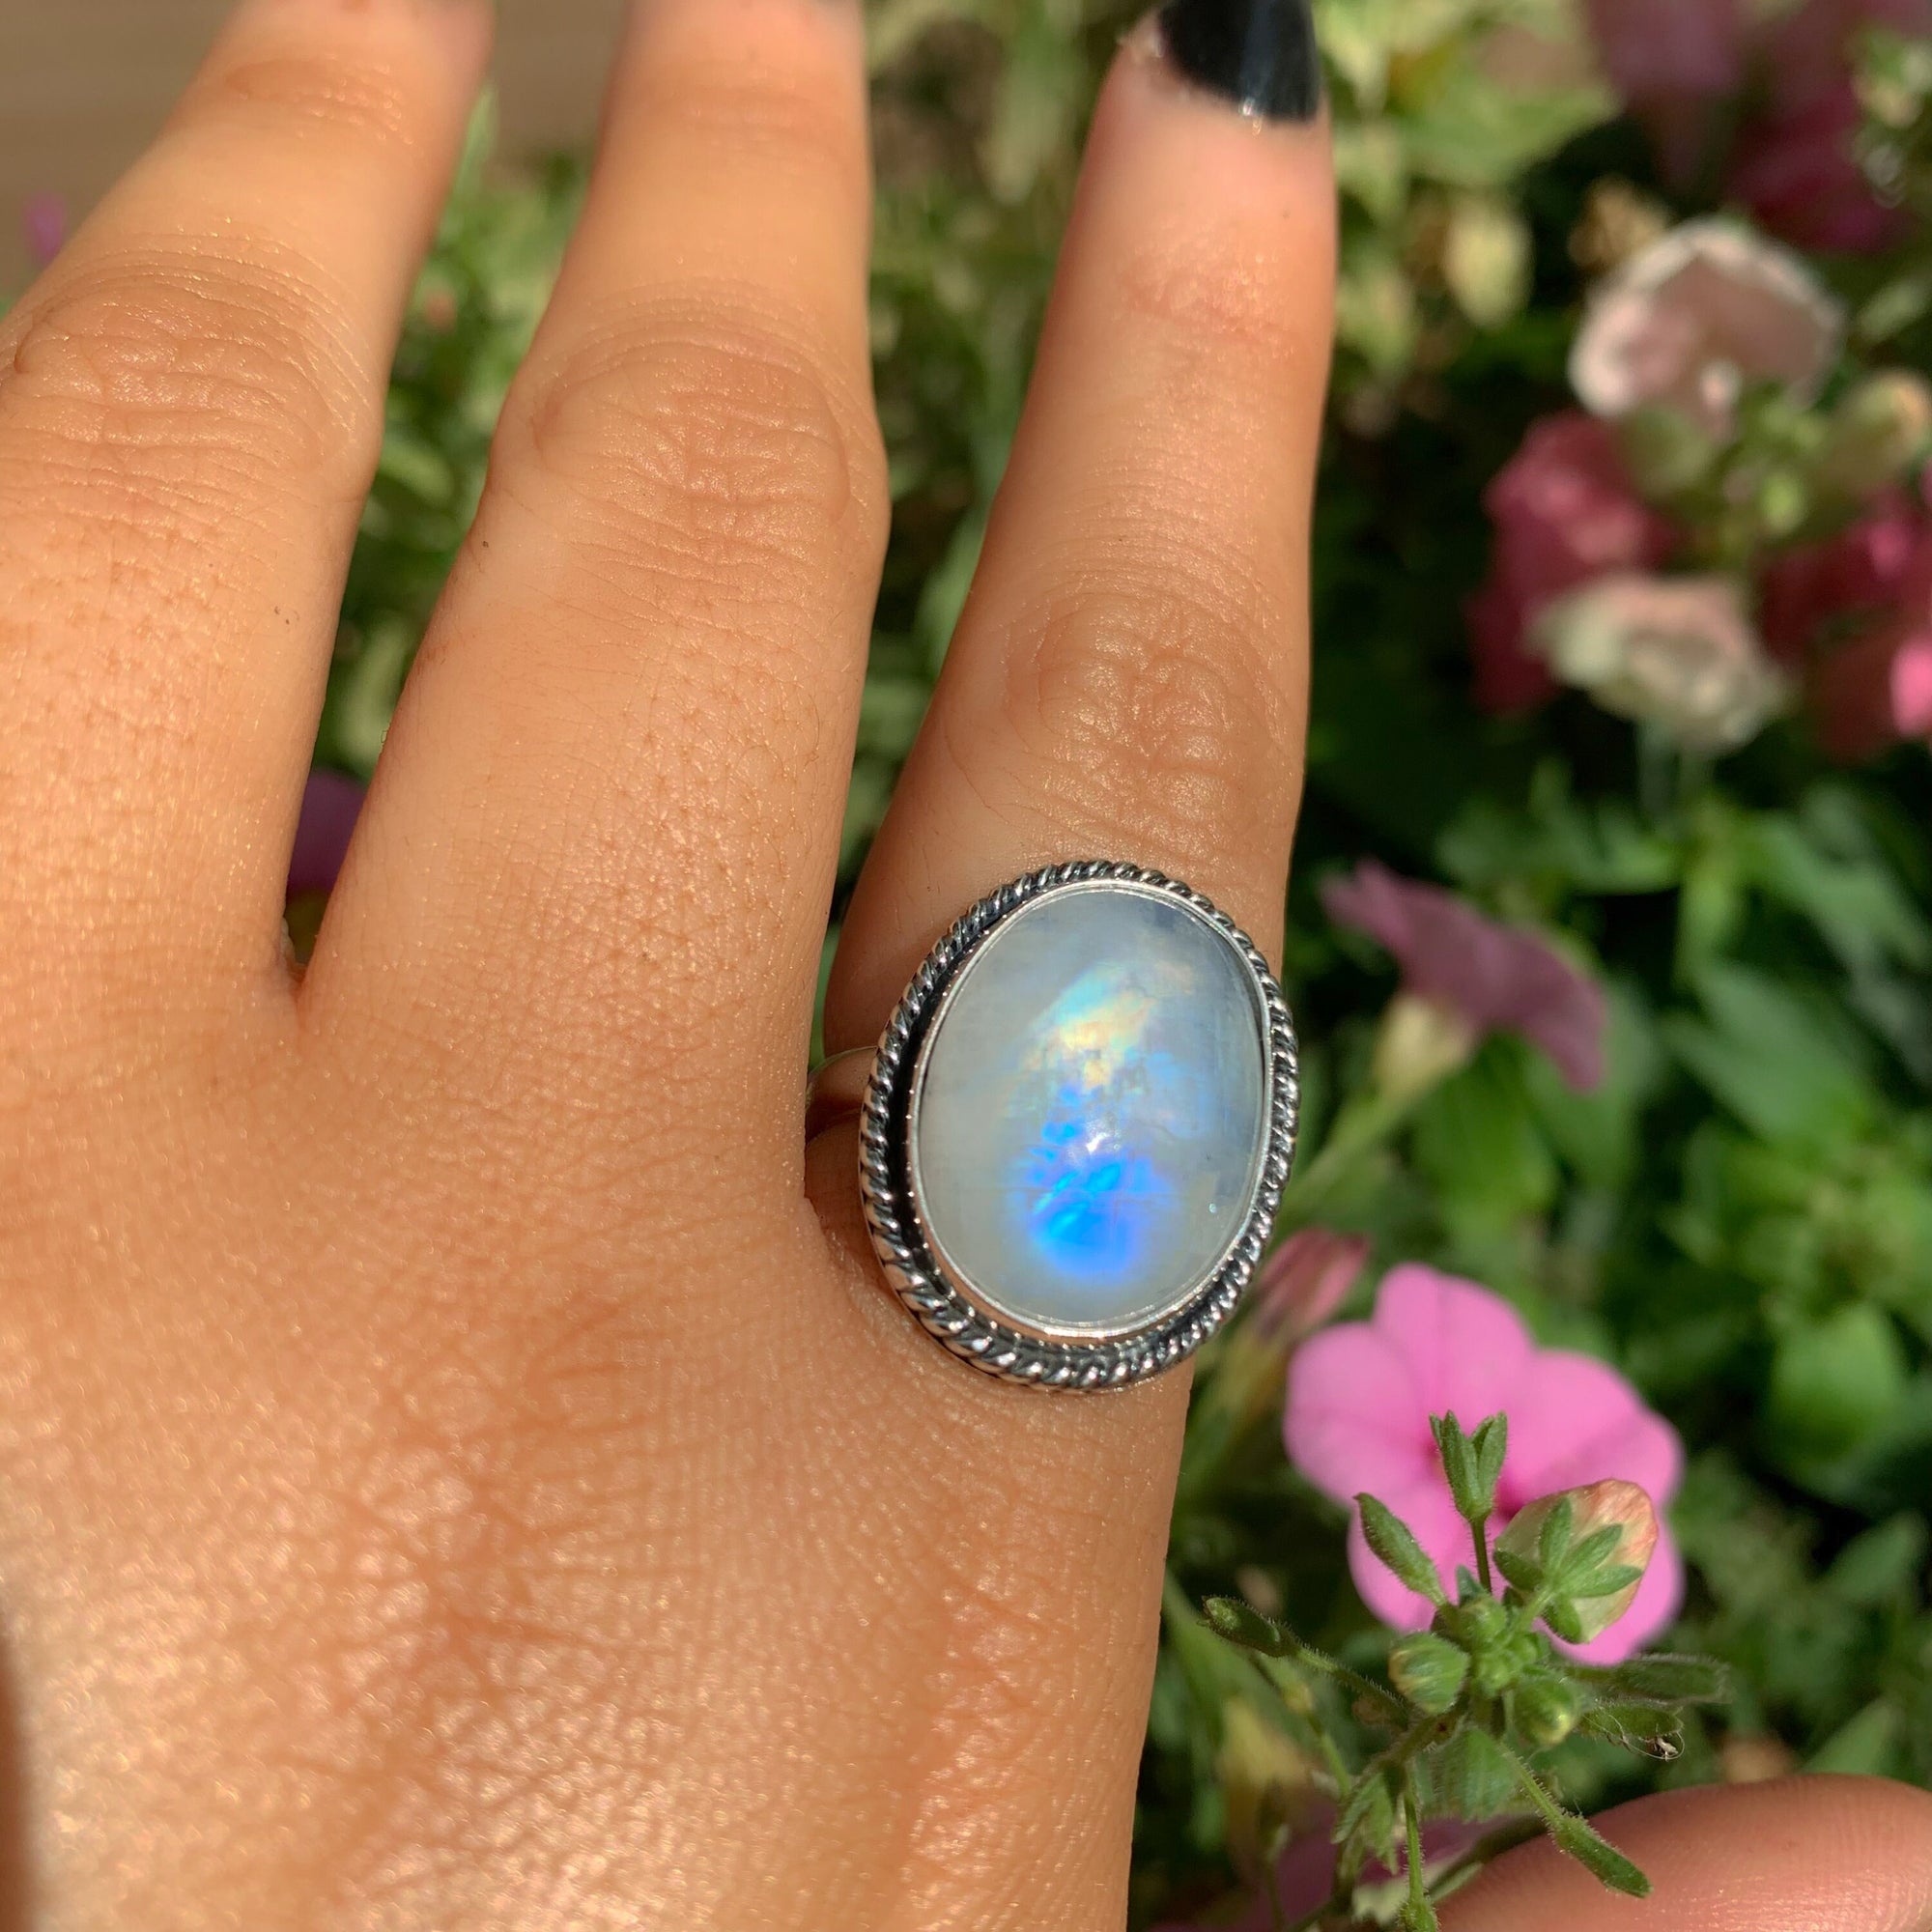 Moonstone Ring - Size 6 3/4 - Sterling Silver - Rainbow Moonstone Statement Ring - Blue Flash Moonstone Jewellery, Large Moonstone Ring OOAK